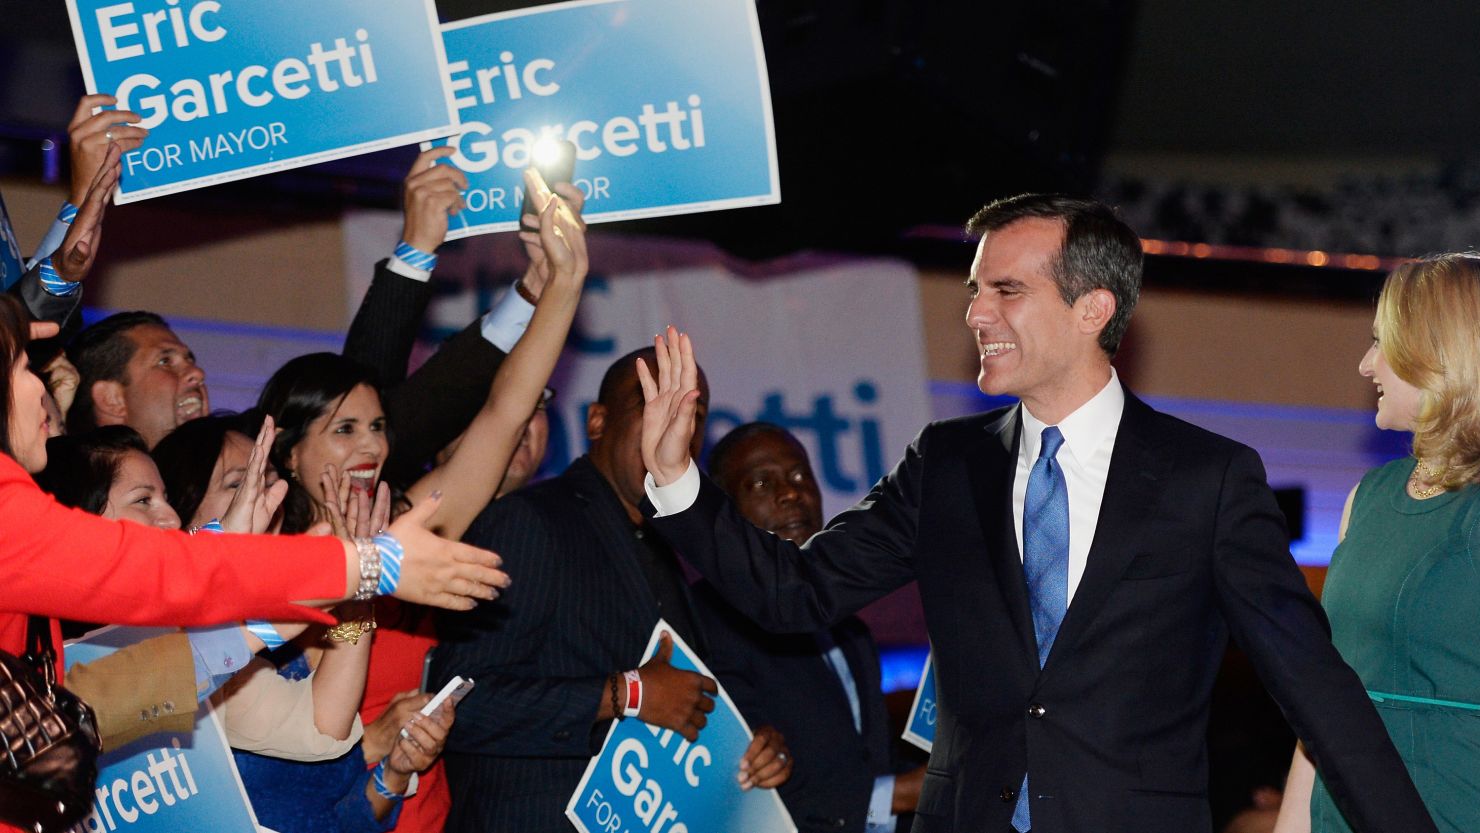 "I am honored to lead this city for the next four years," said Los Angeles Mayor-elect Eric Garcetti.